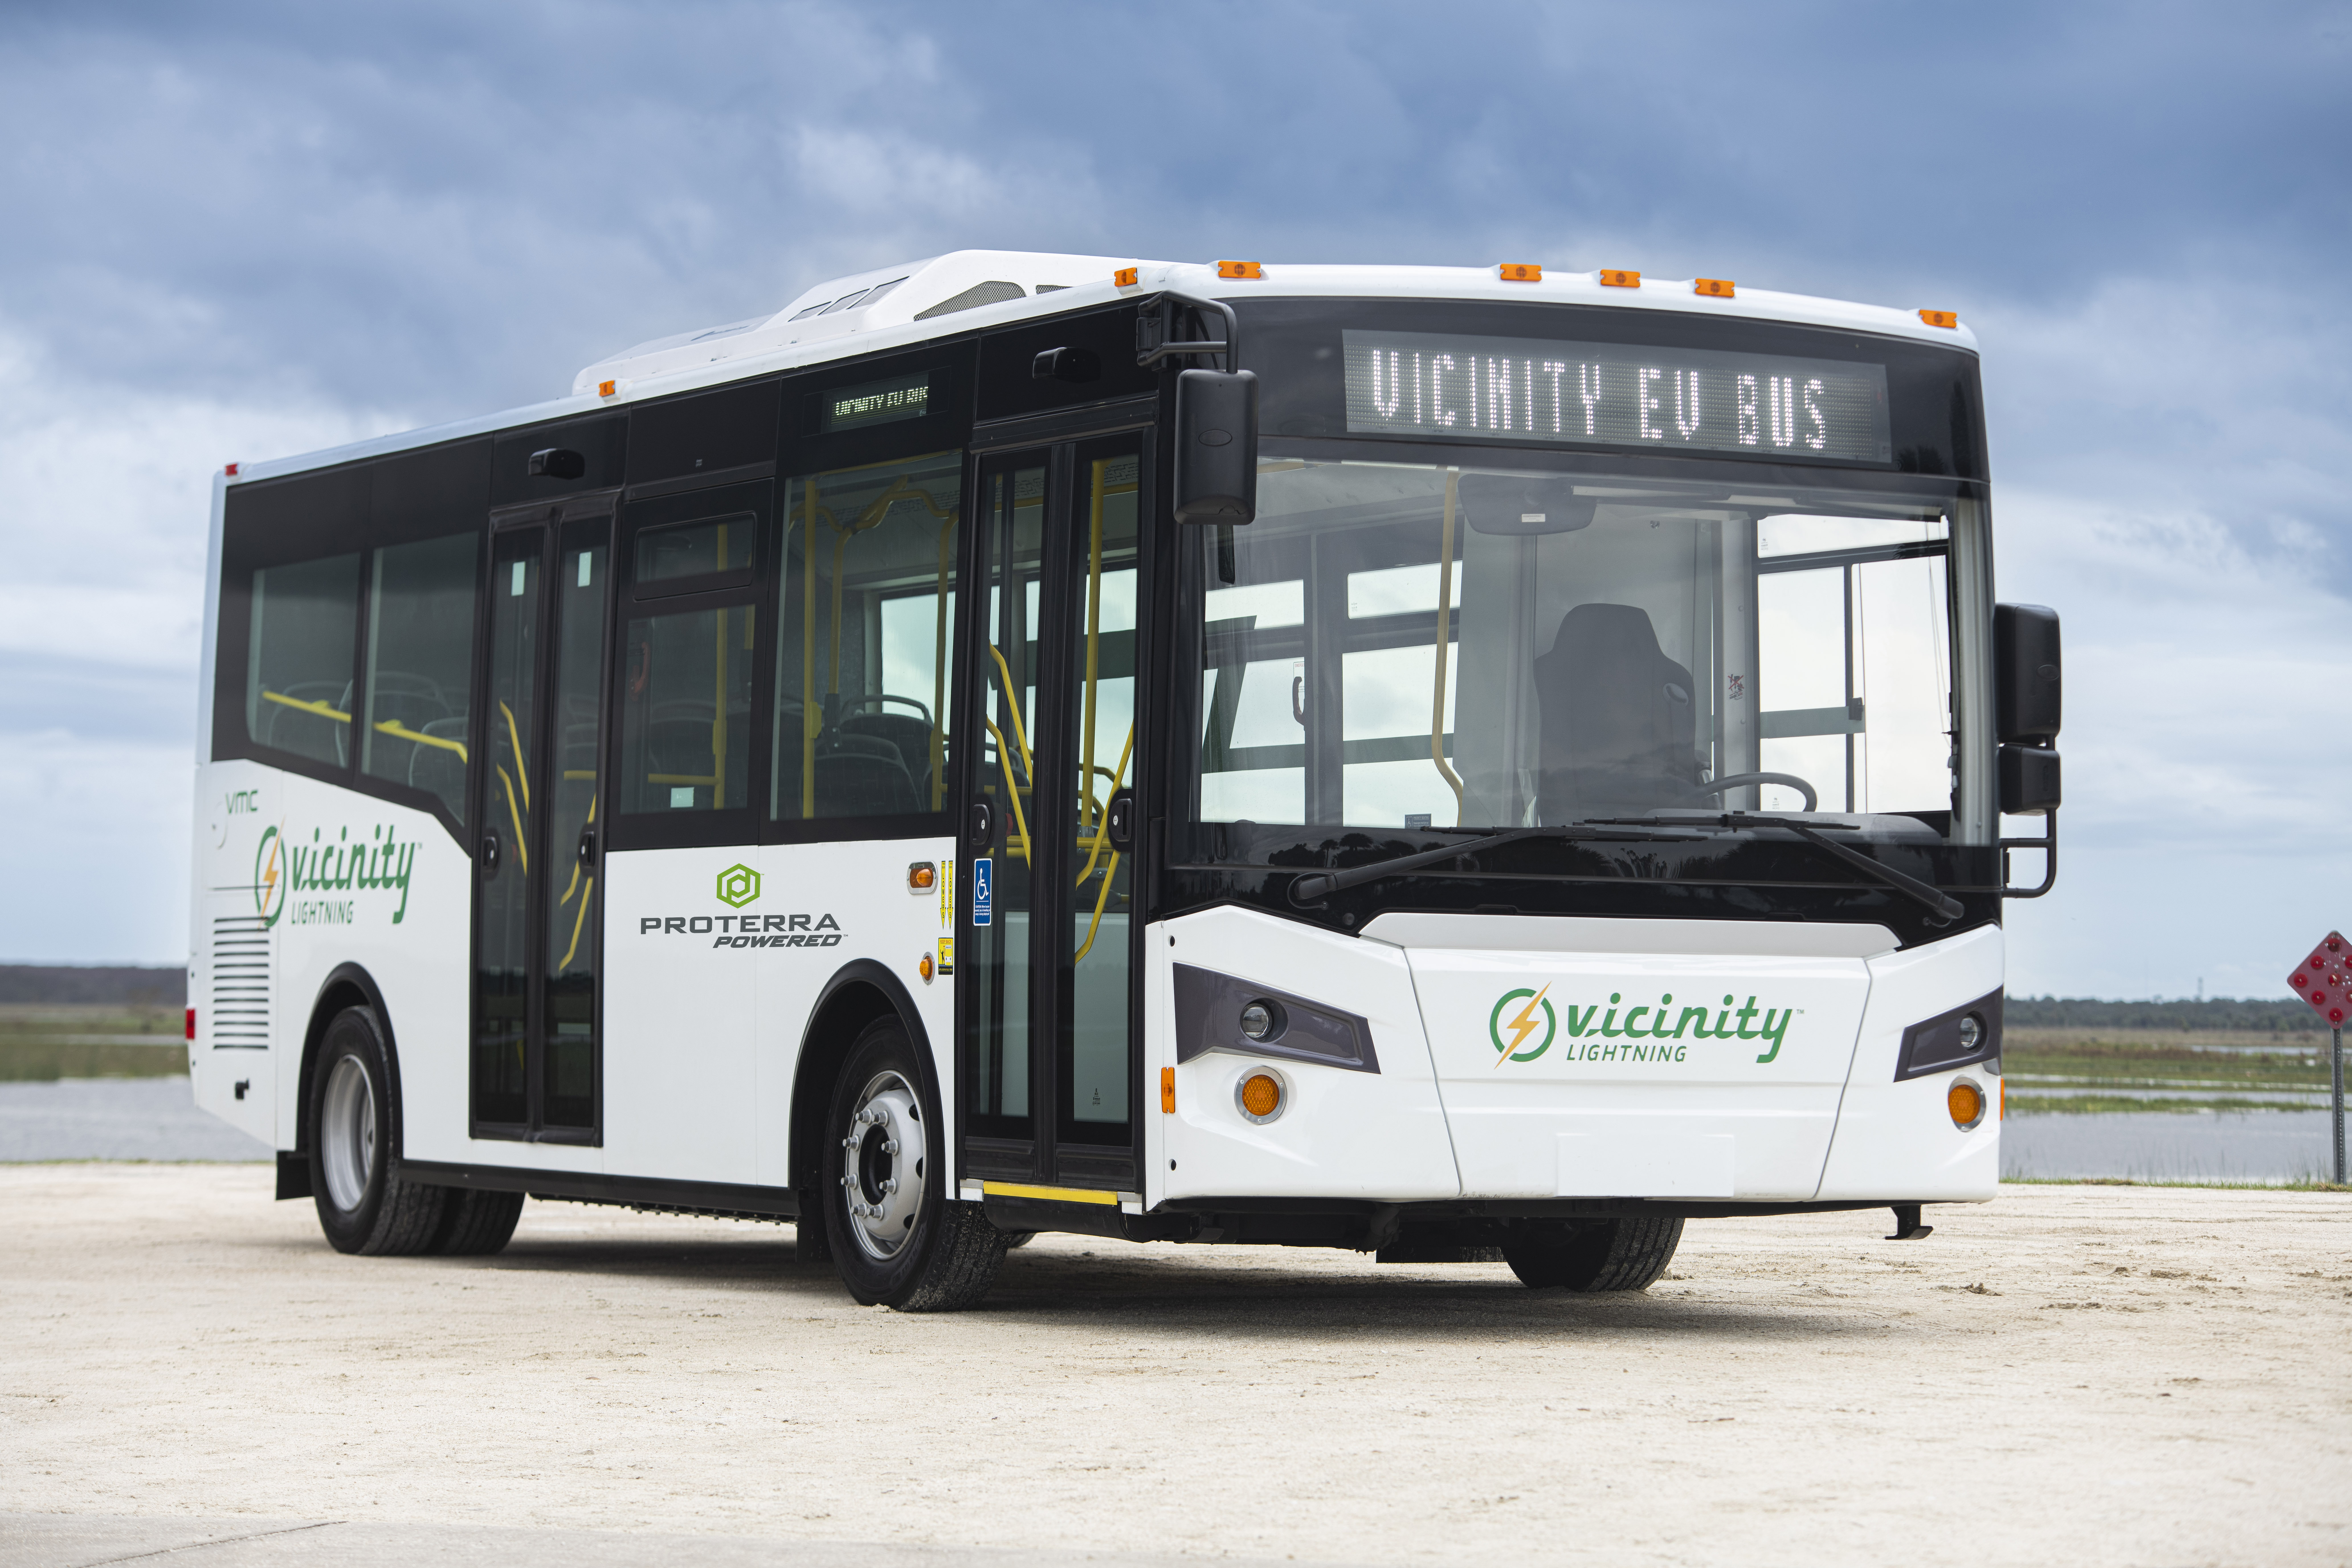 The Proterra Powered Vicinity Lightning electric transit bus